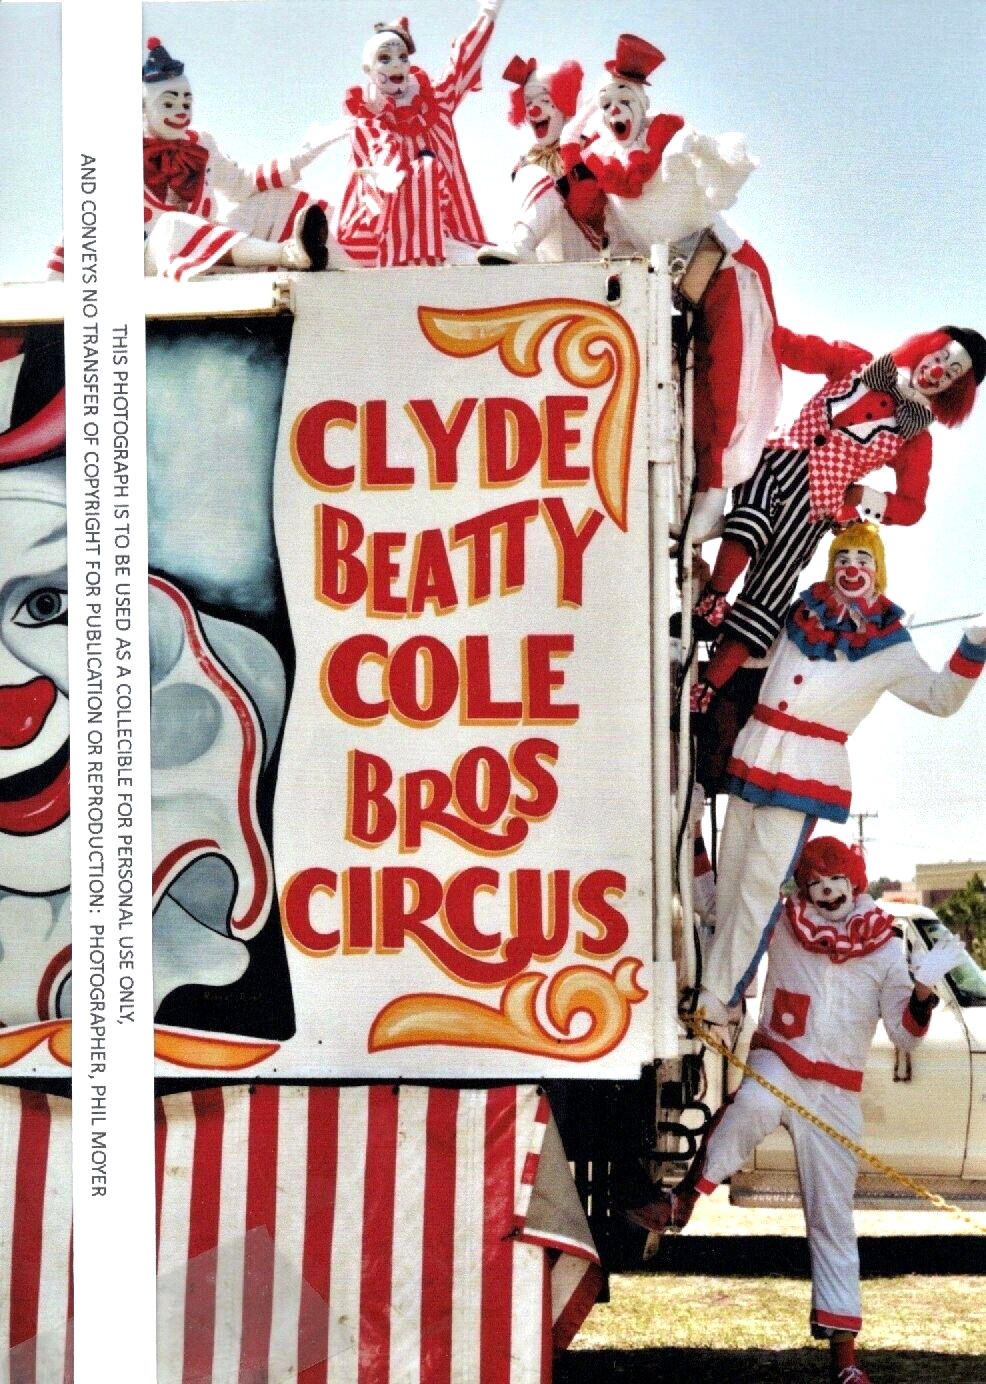 1985 - Clyde Beatty Cole Bros Photograph - Clown Alley on Truck